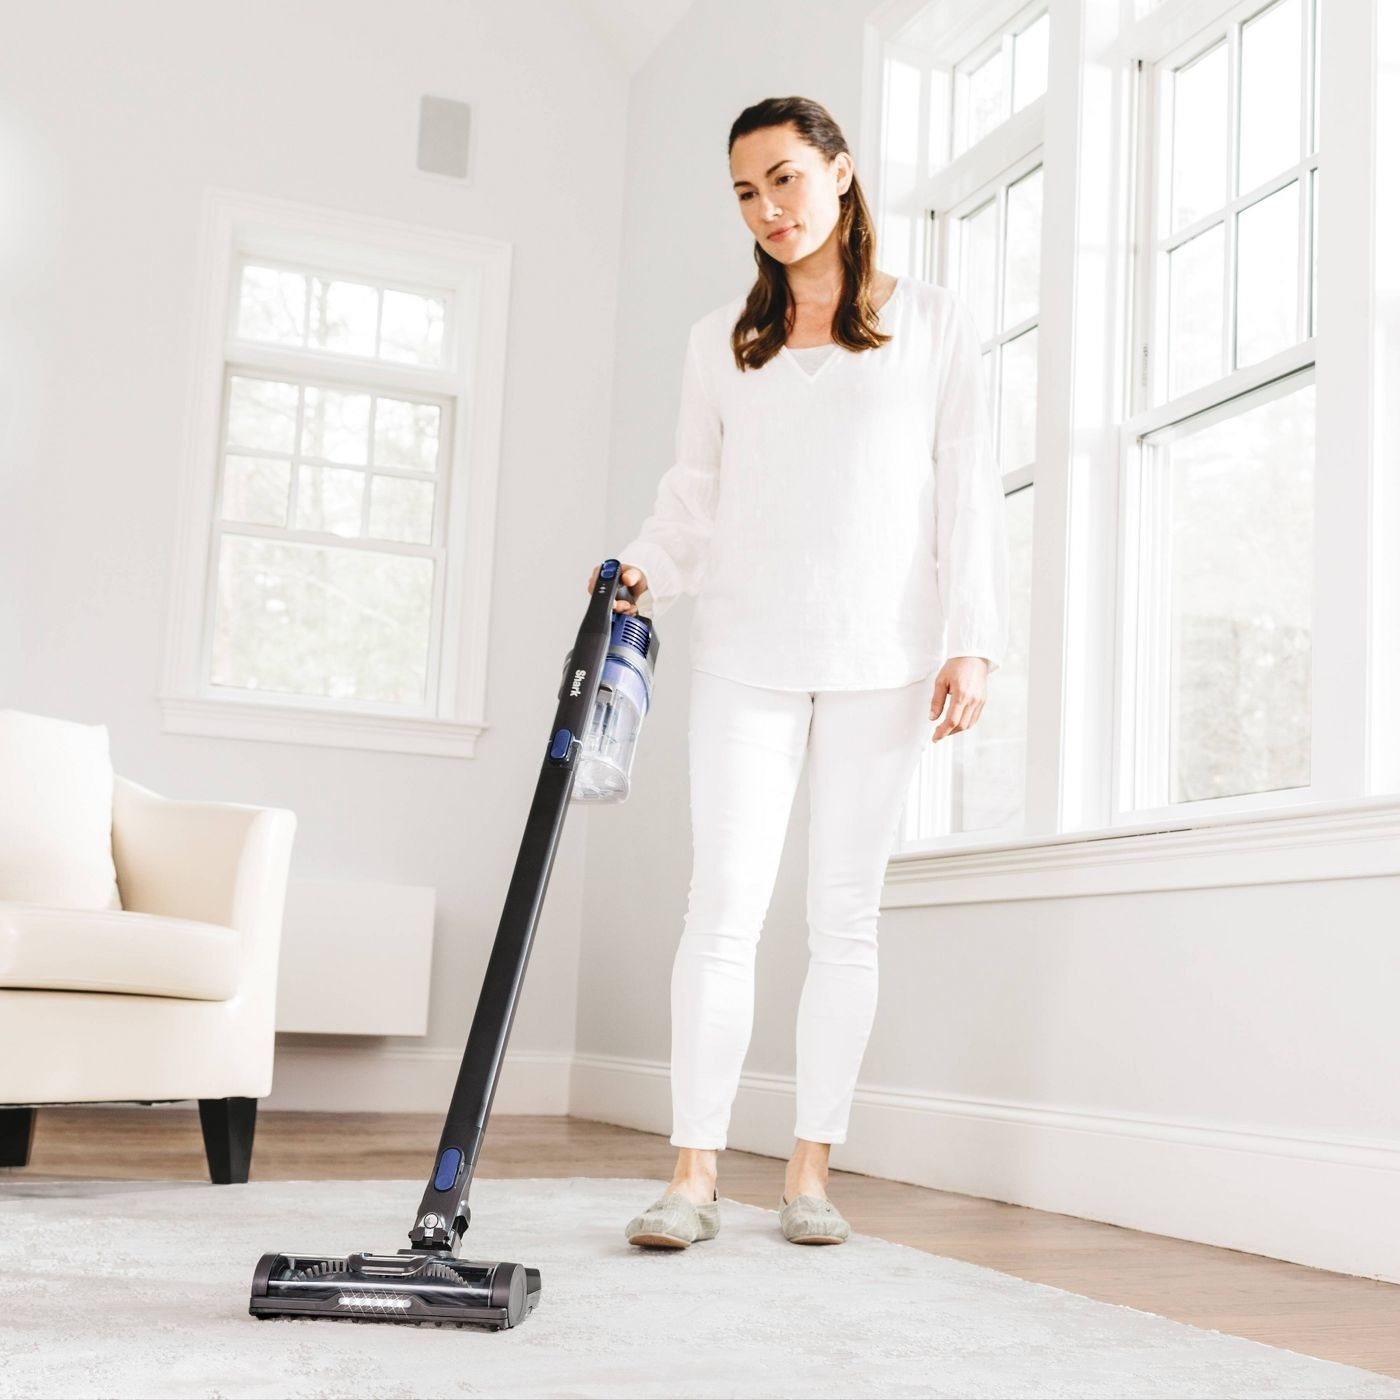 The vacuum, which has no cord or bag, but is a stick vacuum with a small compartment to collect dirt